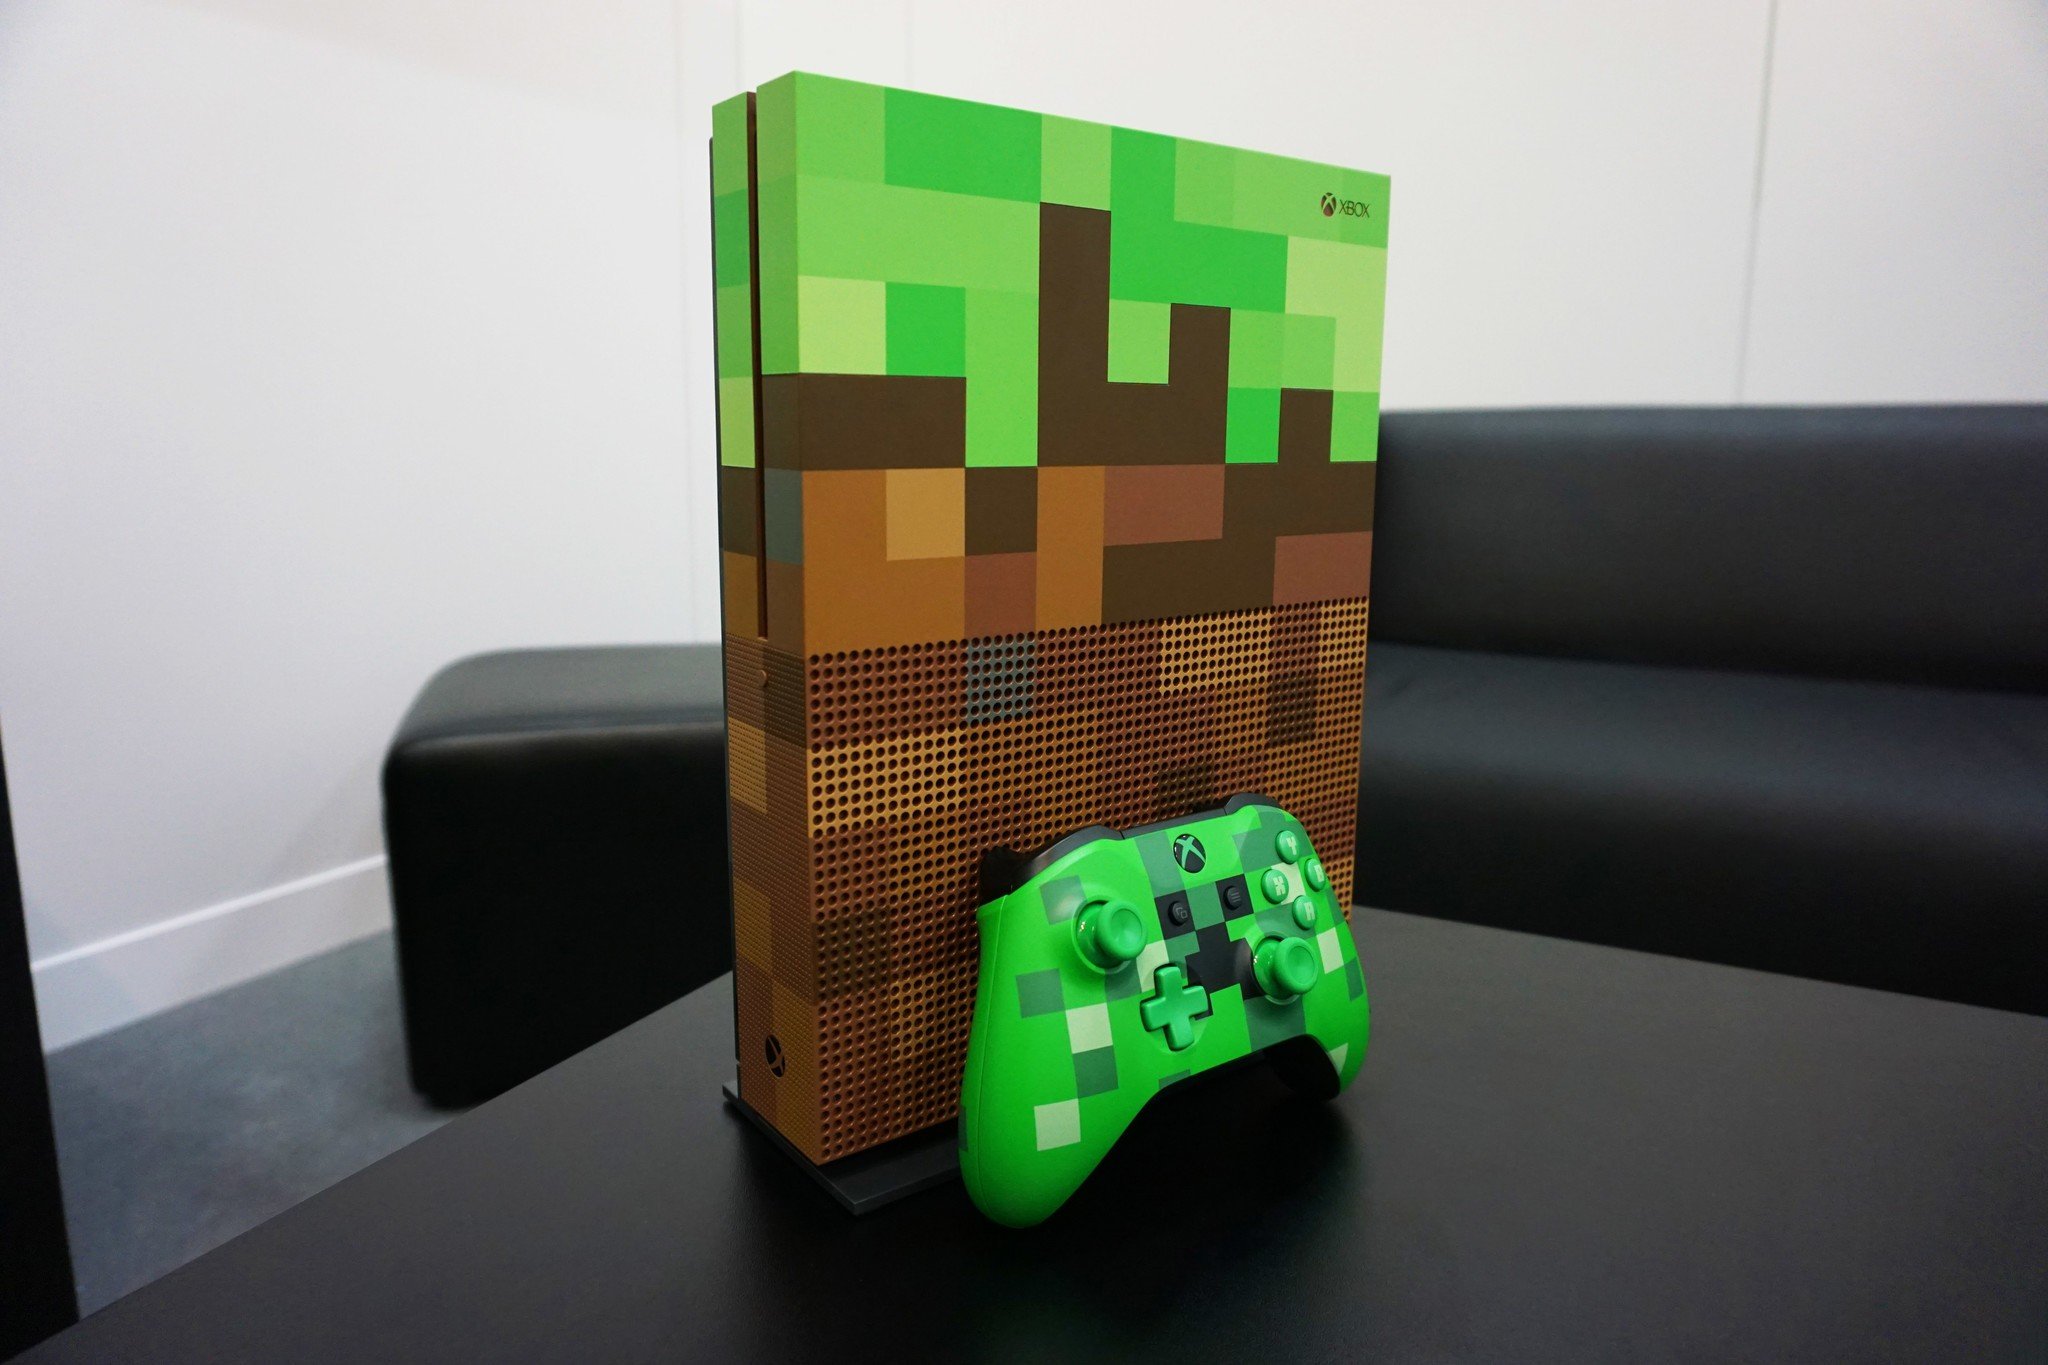 xbox one s 1tb minecraft limited edition